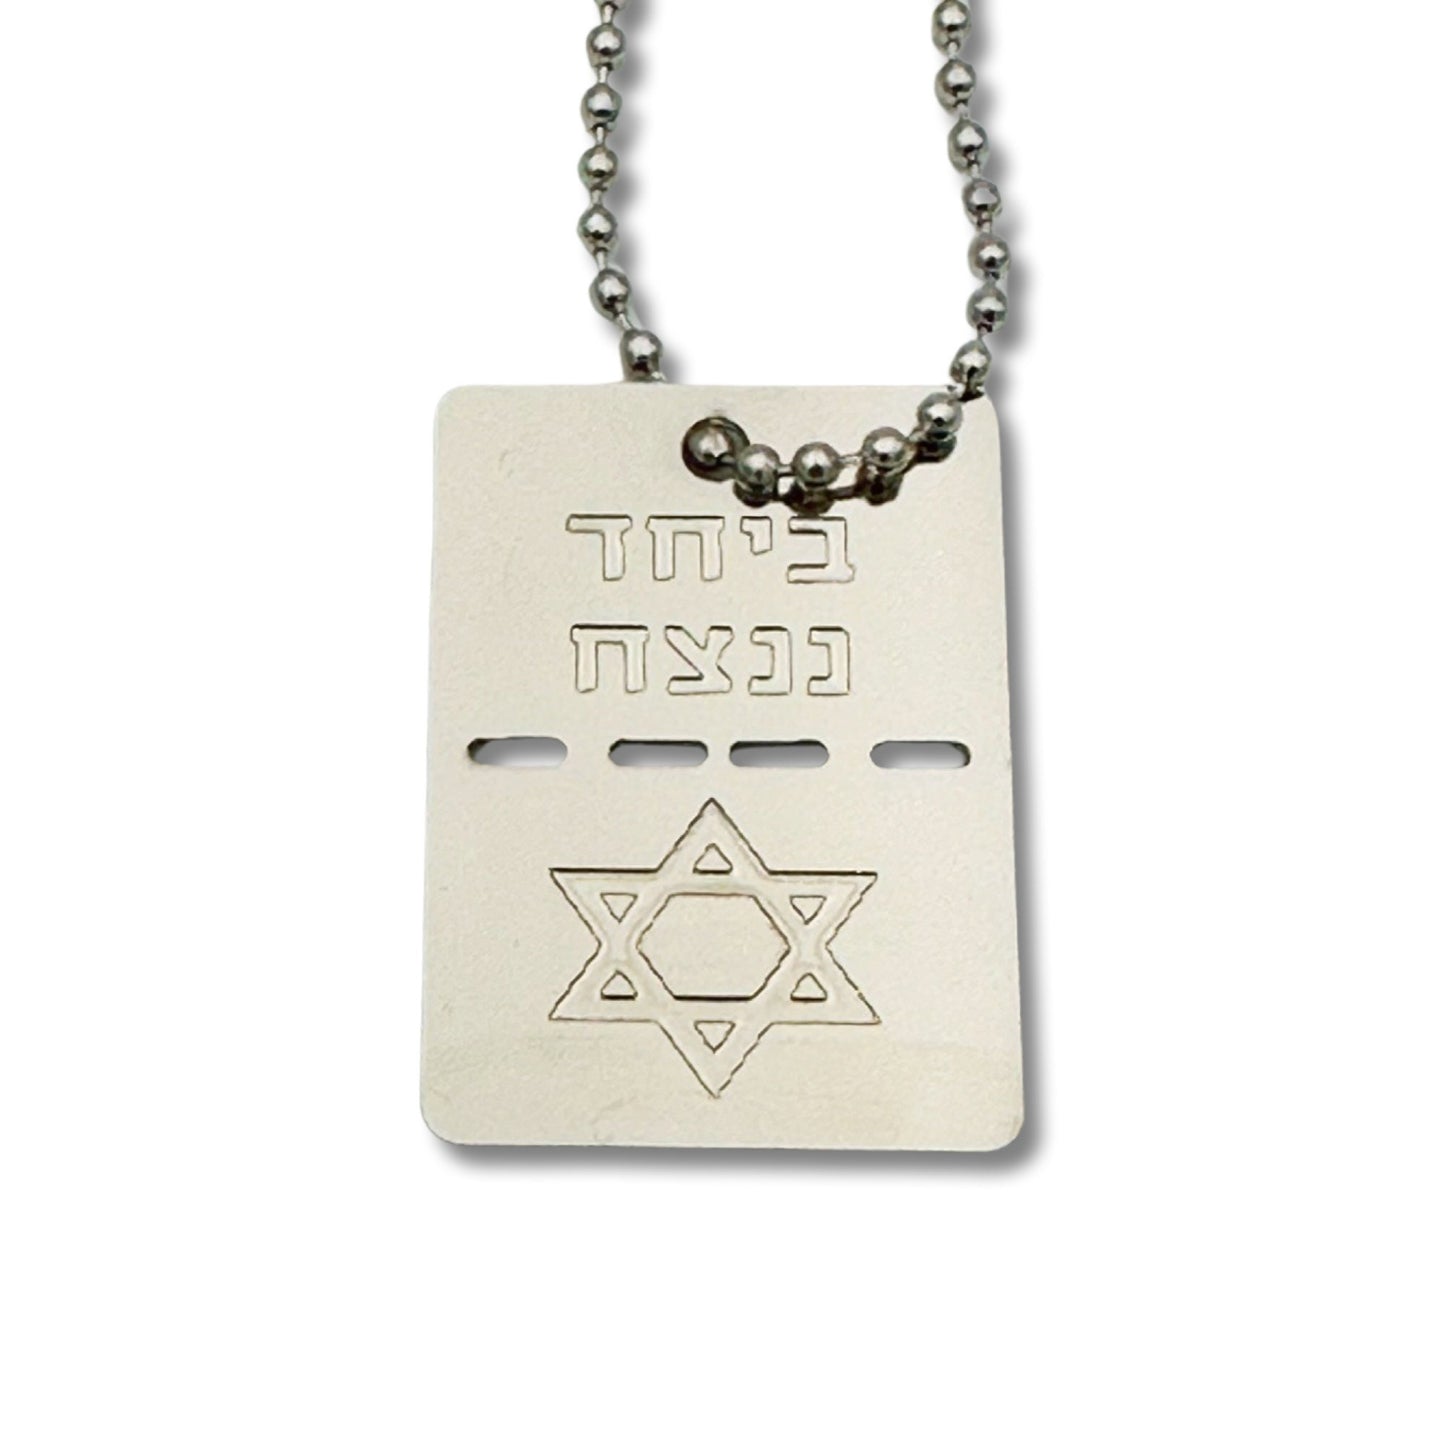 The people of Israel live military tag